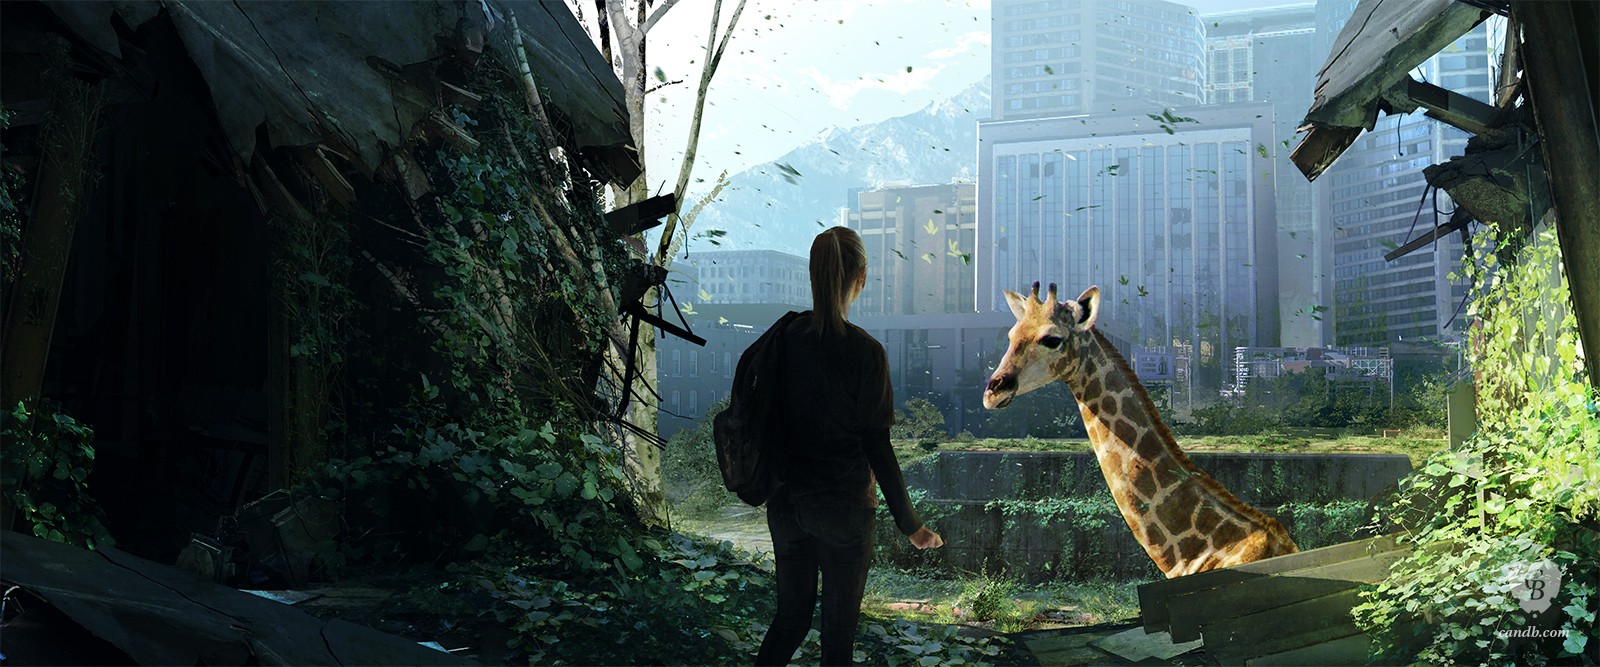 a-new-day-last-of-us-naughty-dog_1600x66